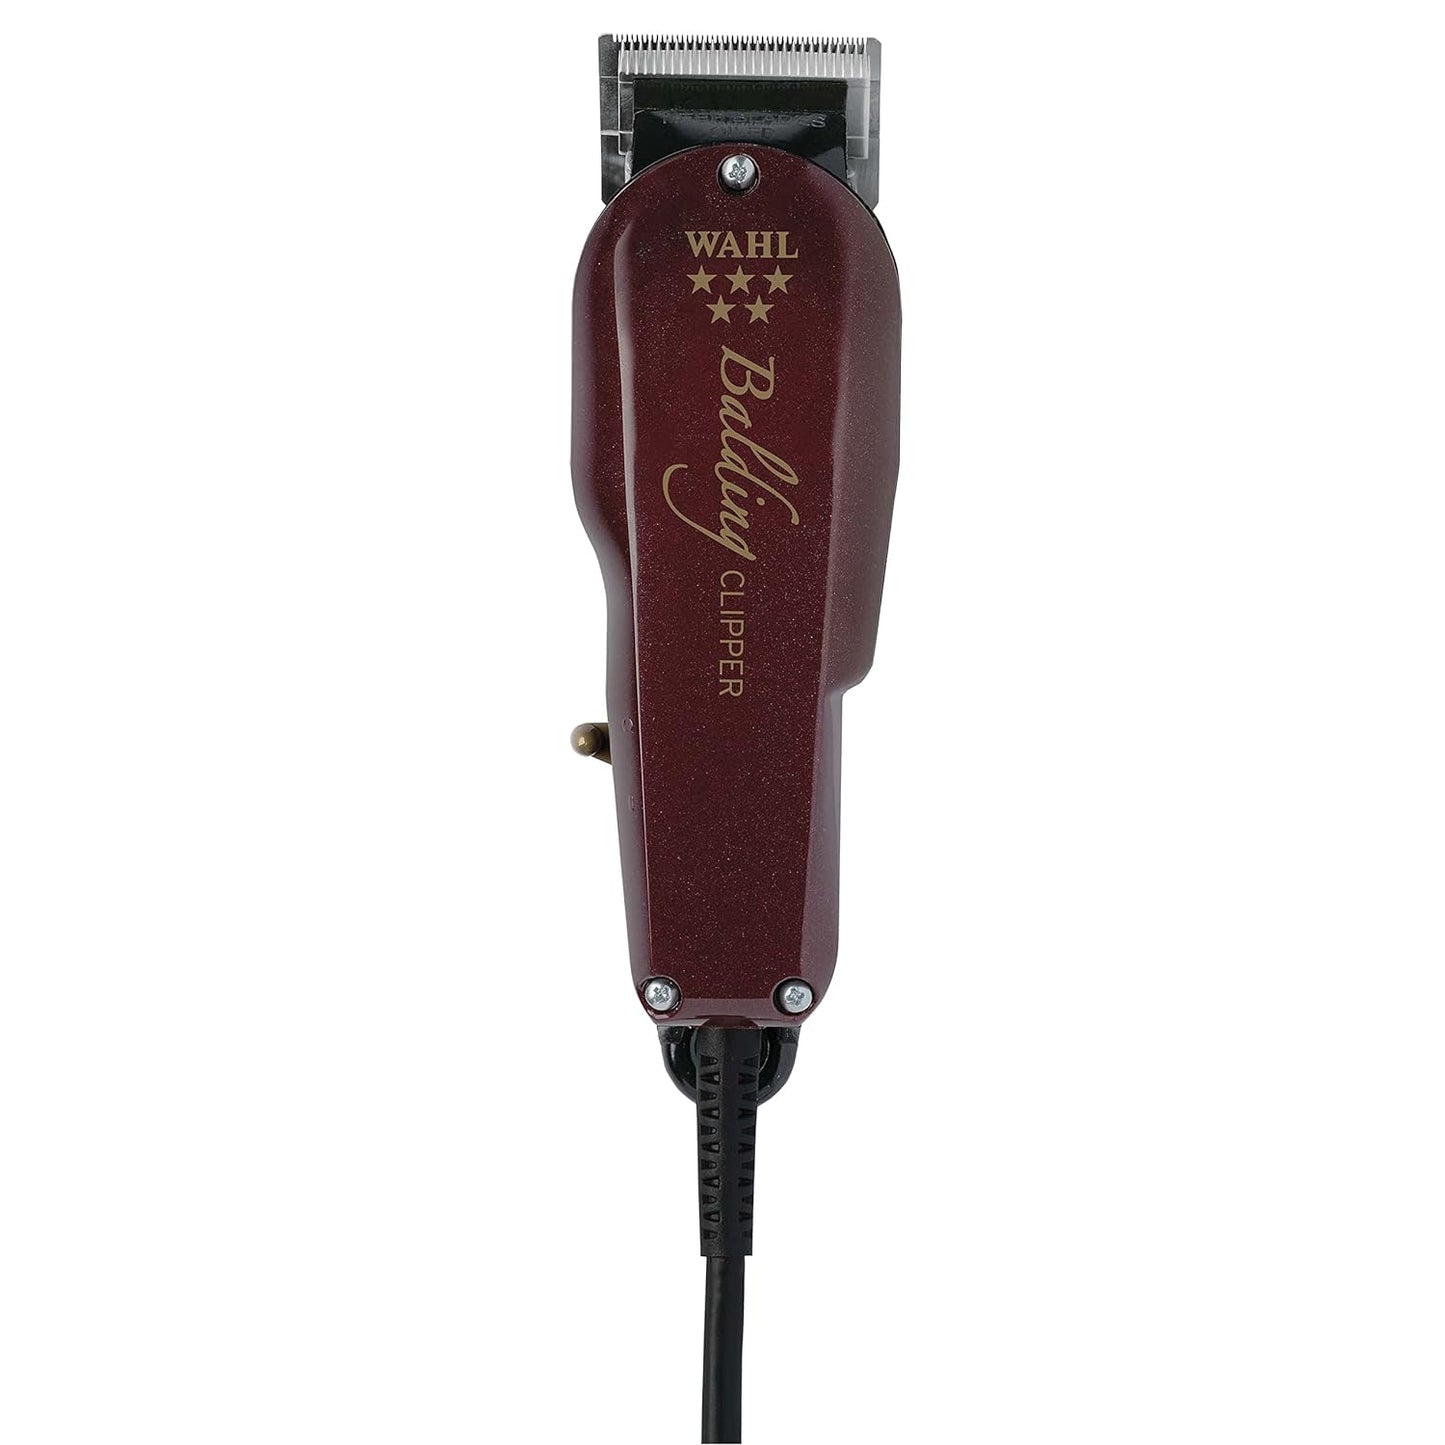 Wahl Professional 5-Star Balding Clipper with V5000+ Electromagnetic Motor and 2105 Balding Blade for Ultra Close Trimming, Outlining, and for Full Head Balding for Professional Barbers and Stylists - Model 8110